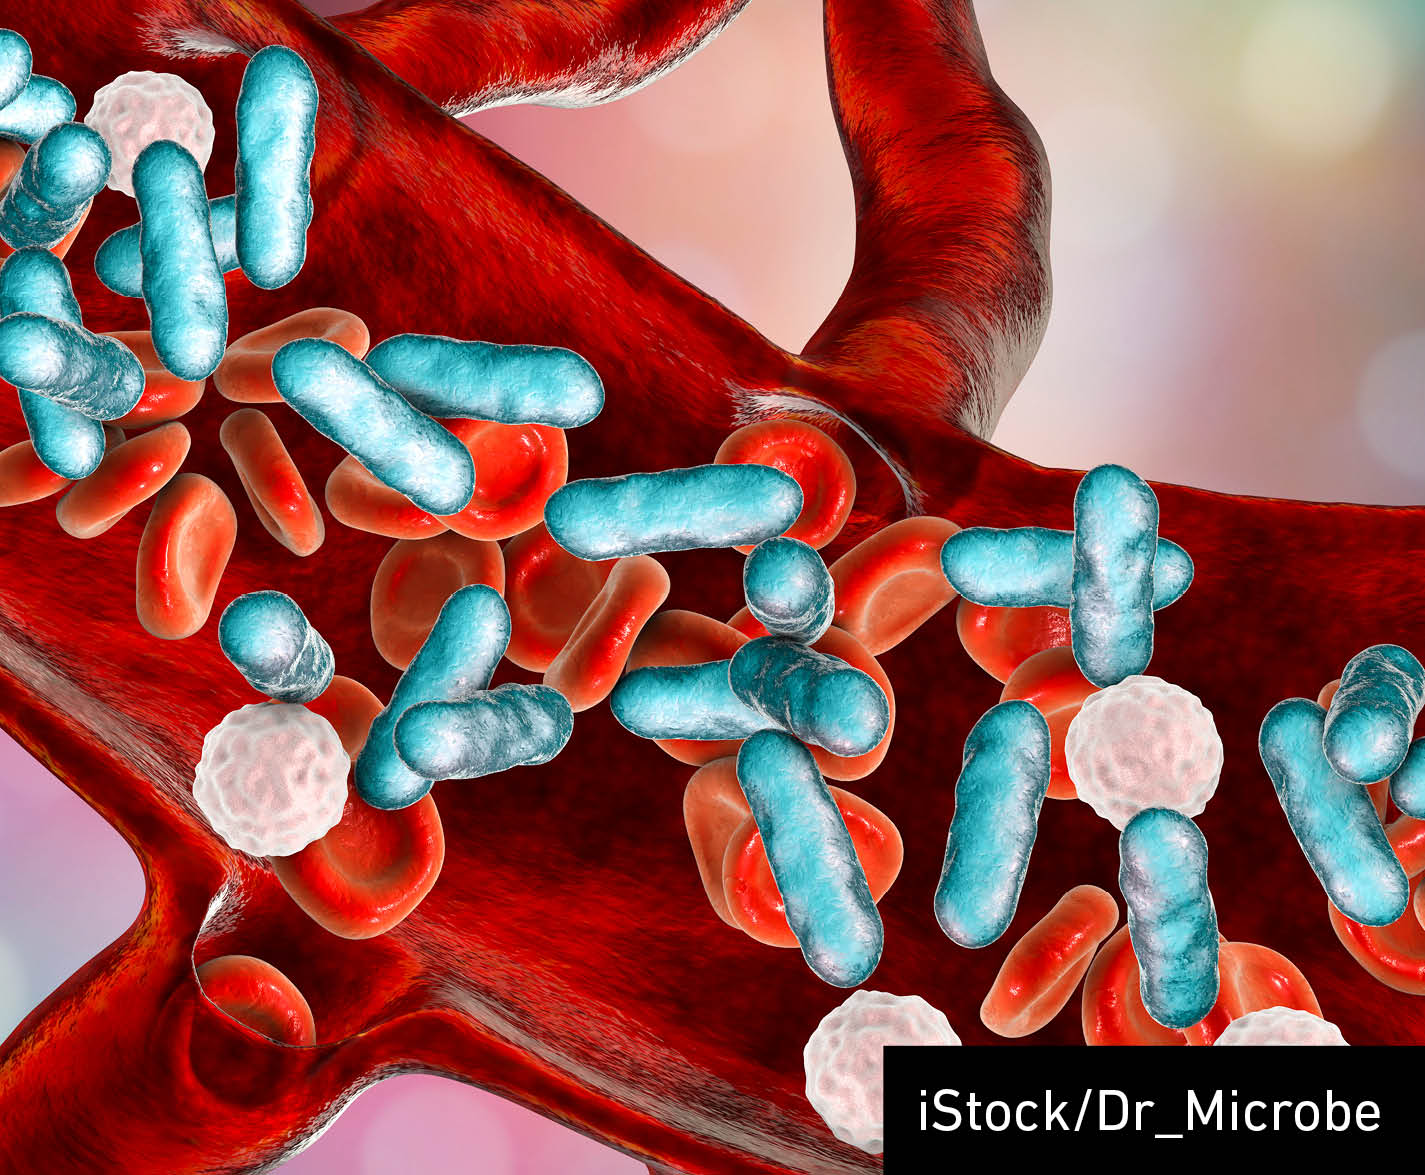 Sepsis, bacteria in blood. 3D illustration showing rod-shaped bacteria with red blood cells and leukocytes